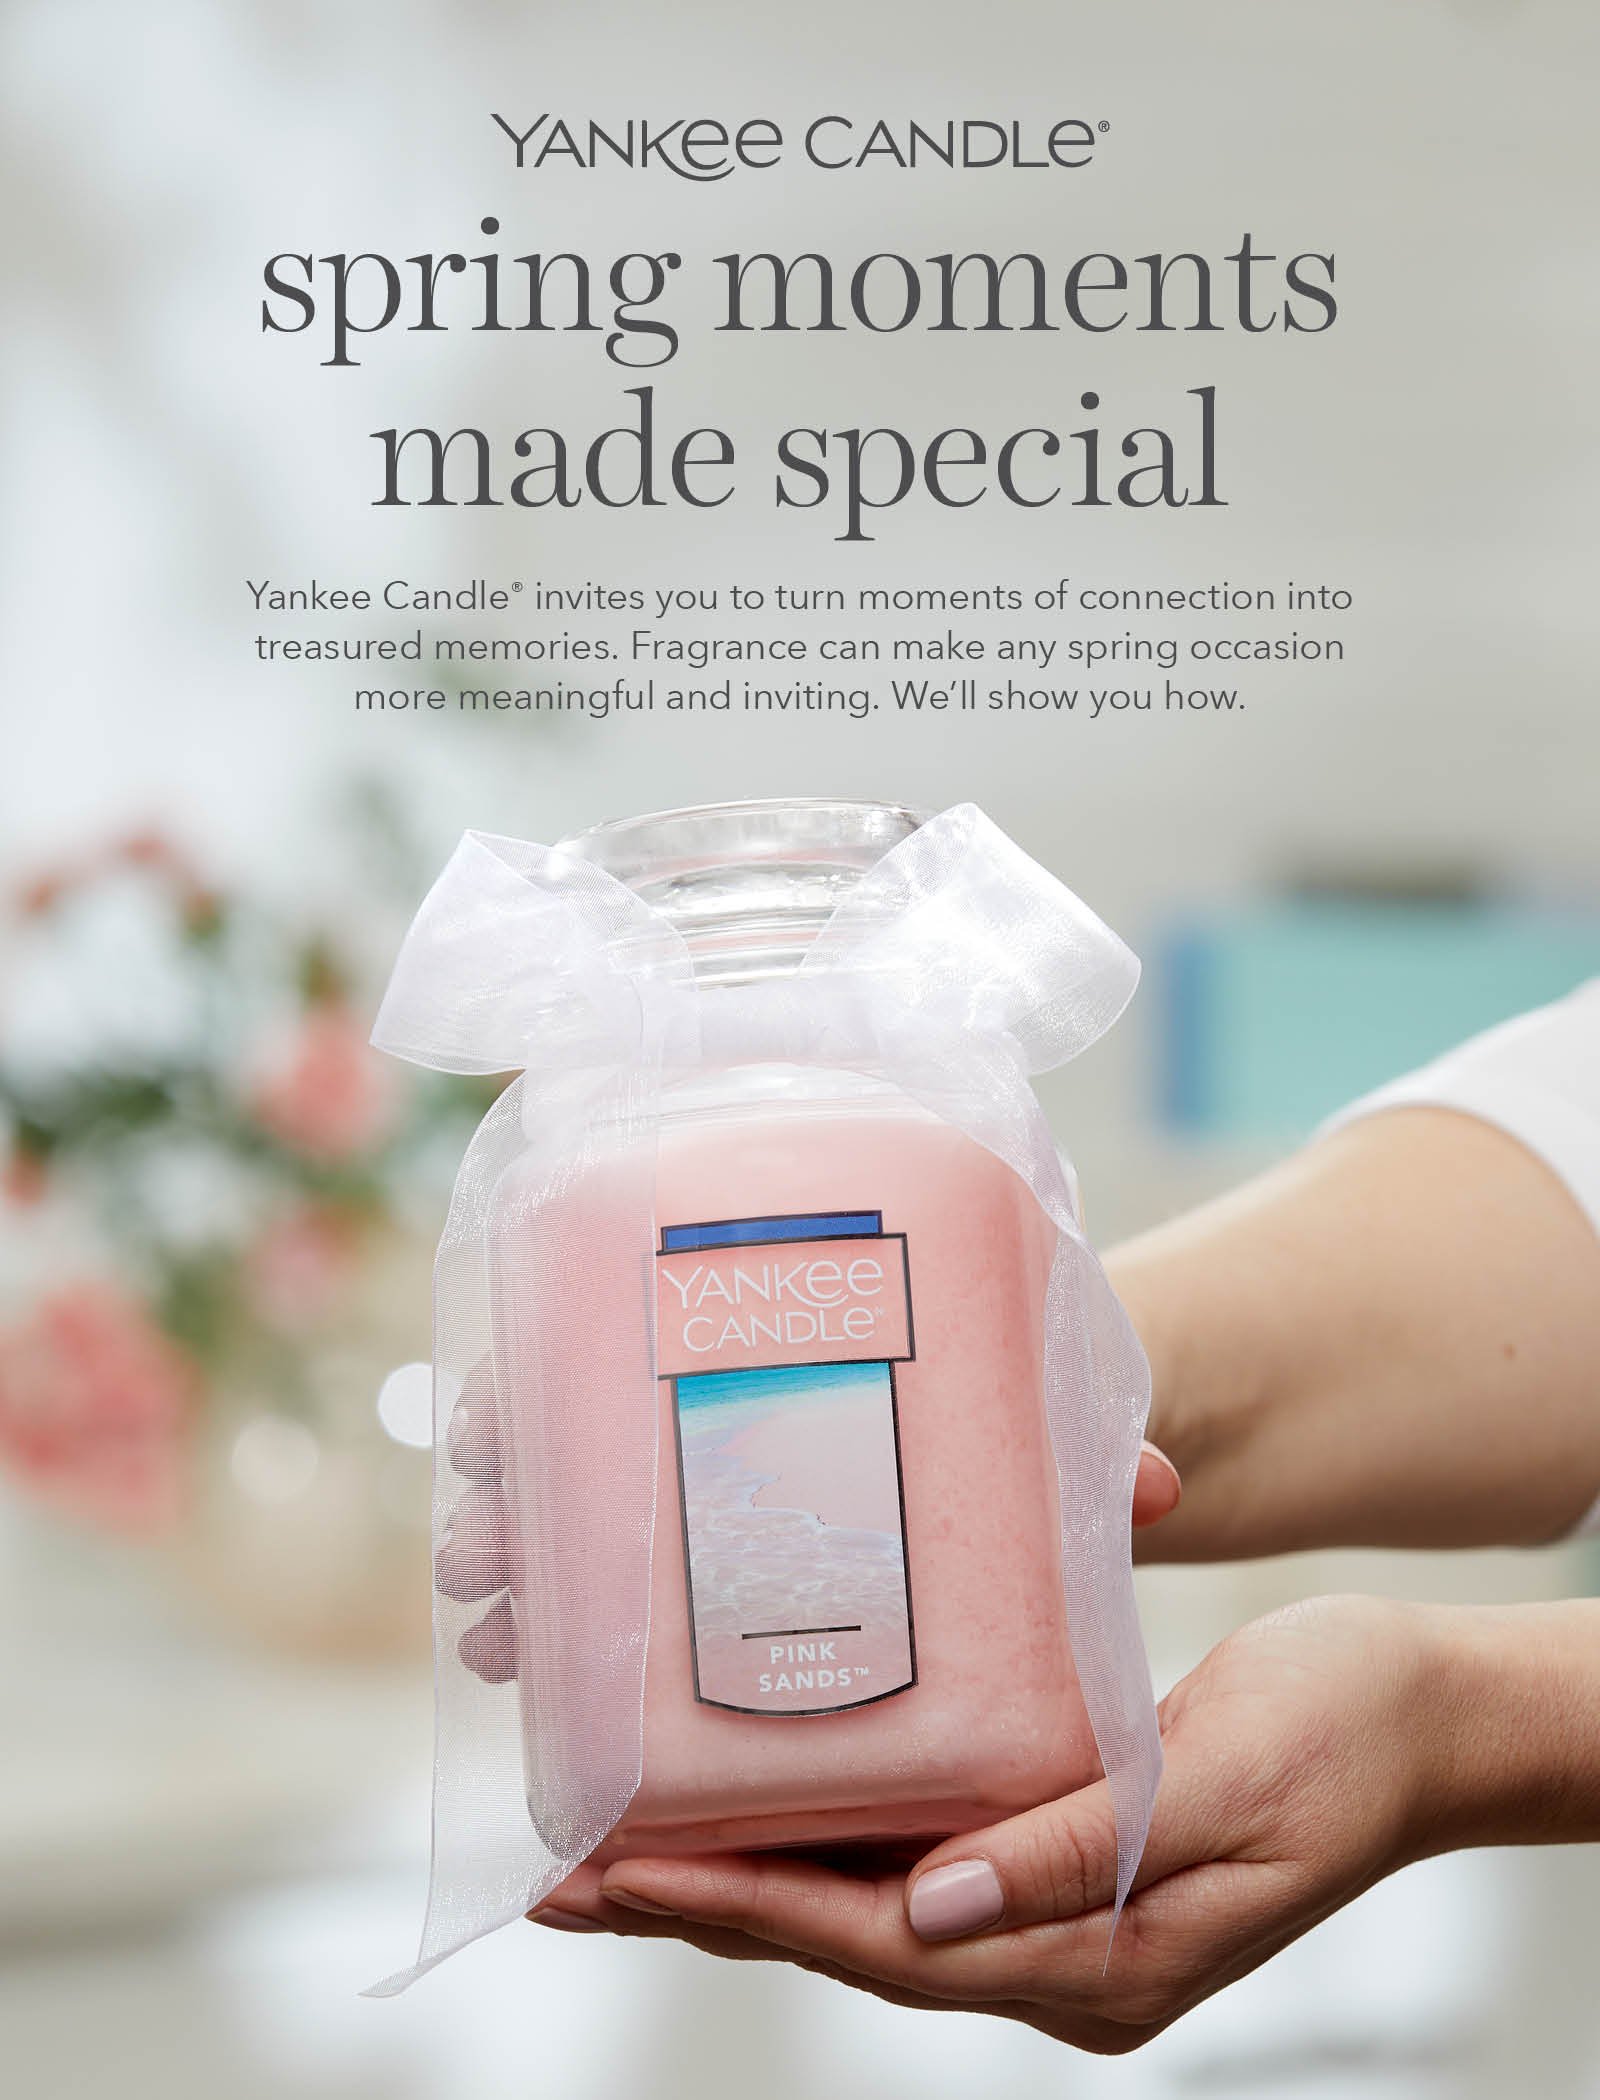 spring moments made special spring digital catalog front page photo featuring pink sands original large jar candle